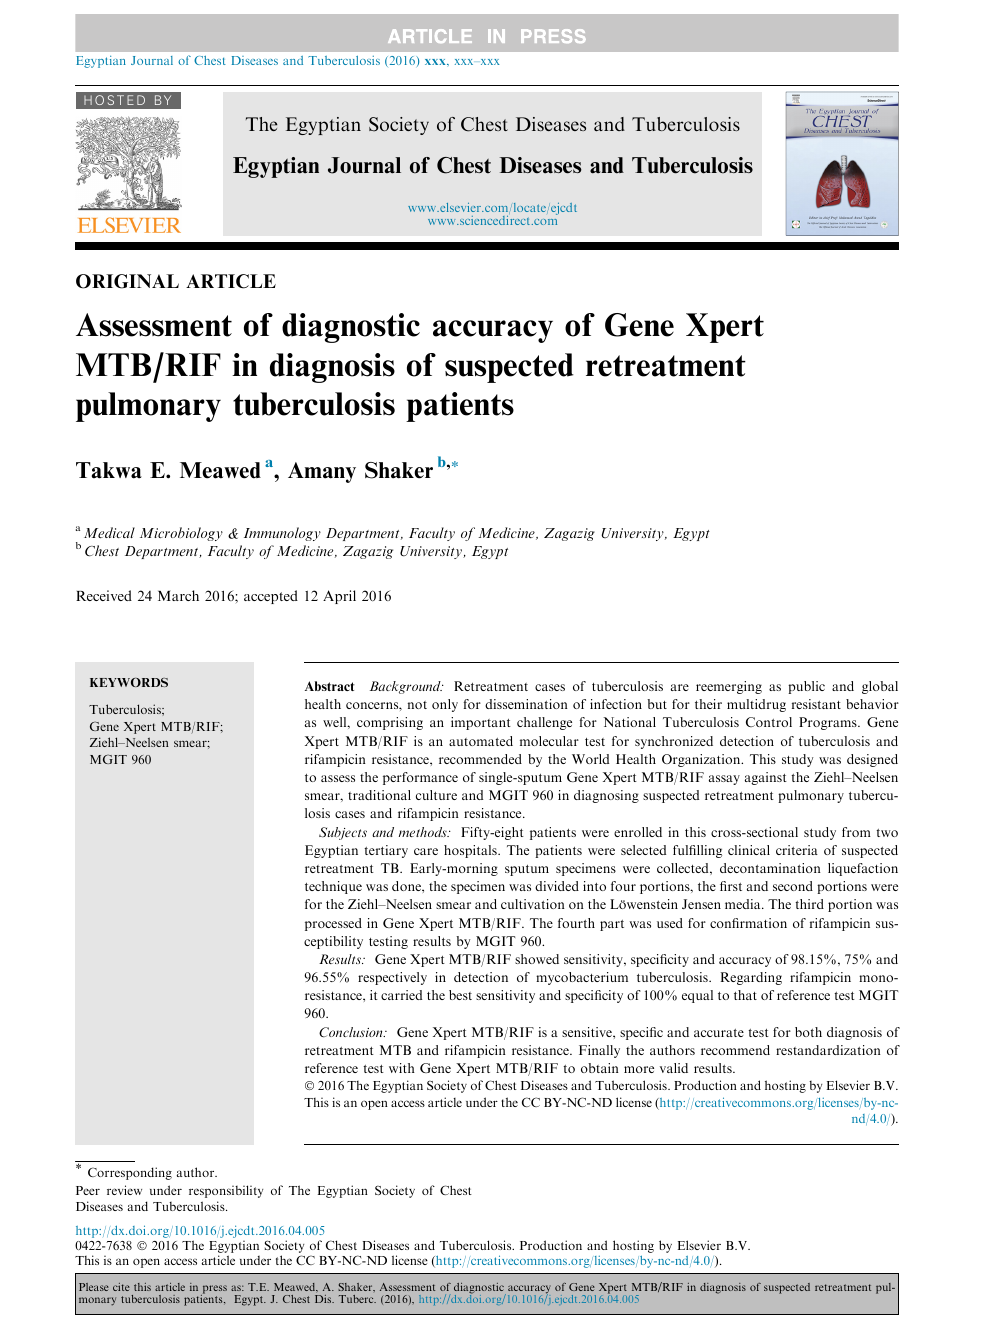 Assessment Of Diagnostic Accuracy Of Gene Xpert Mtb Rif In Diagnosis Of Suspected Retreatment Pulmonary Tuberculosis Patients Topic Of Research Paper In Health Sciences Download Scholarly Article Pdf And Read For Free